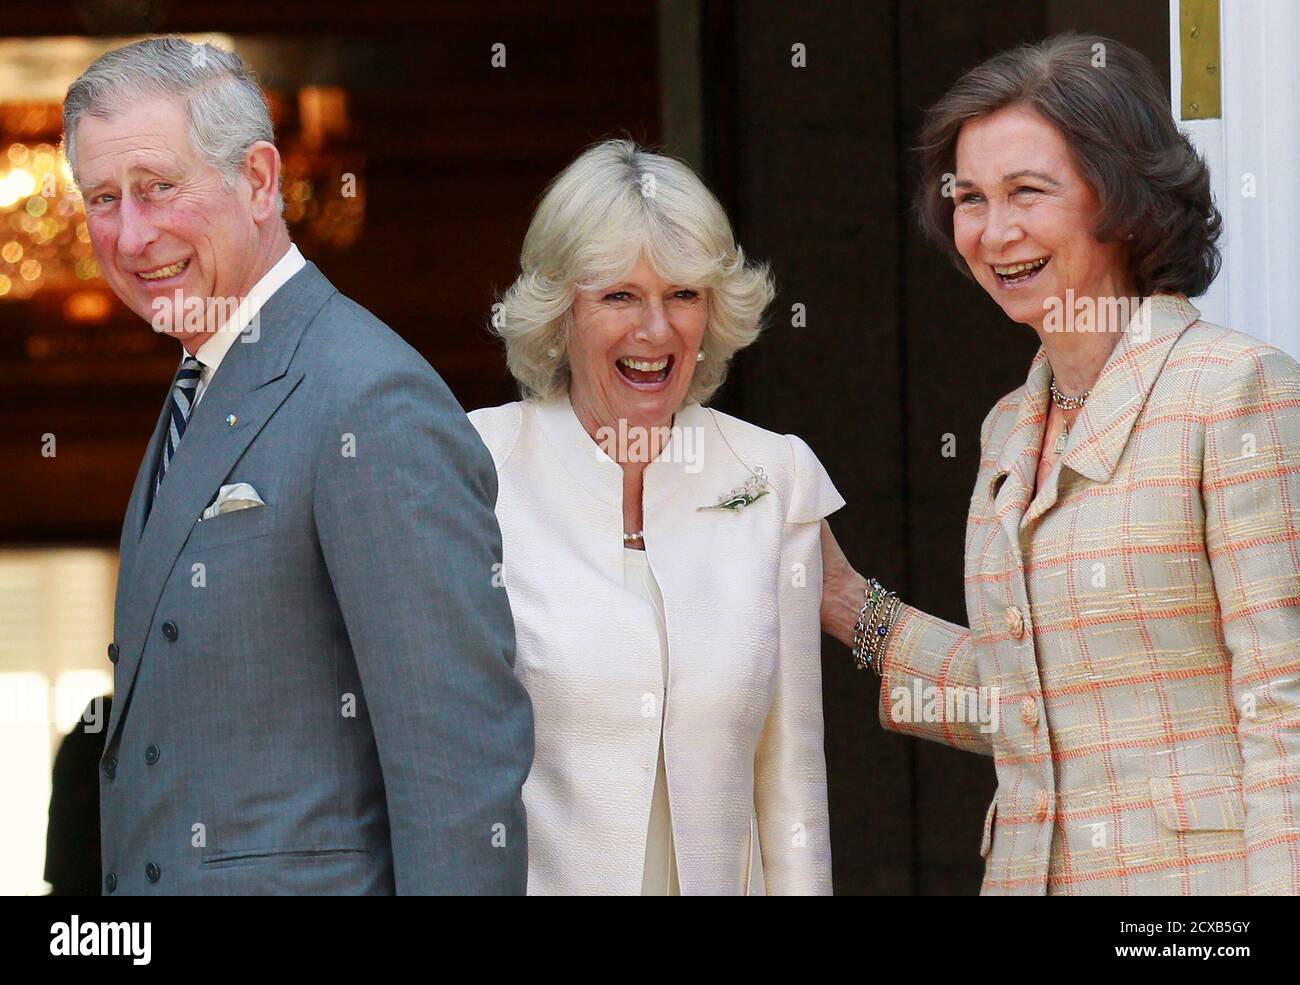 britains-prince-charles-his-wife-camilla-c-duchess-of-cornwall-and-spains-queen-sofia-r-share-a-laugh-before-a-private-lunch-at-zarzuela-palace-in-madrid-march-31-2011-prince-charles-and-his-wife-camilla-the-duchess-of-cornwall-arrived-in-spain-on-an-official-visit-reuters-andrea-comas-spain-tags-politics-royals-2cxb5gy.jpg